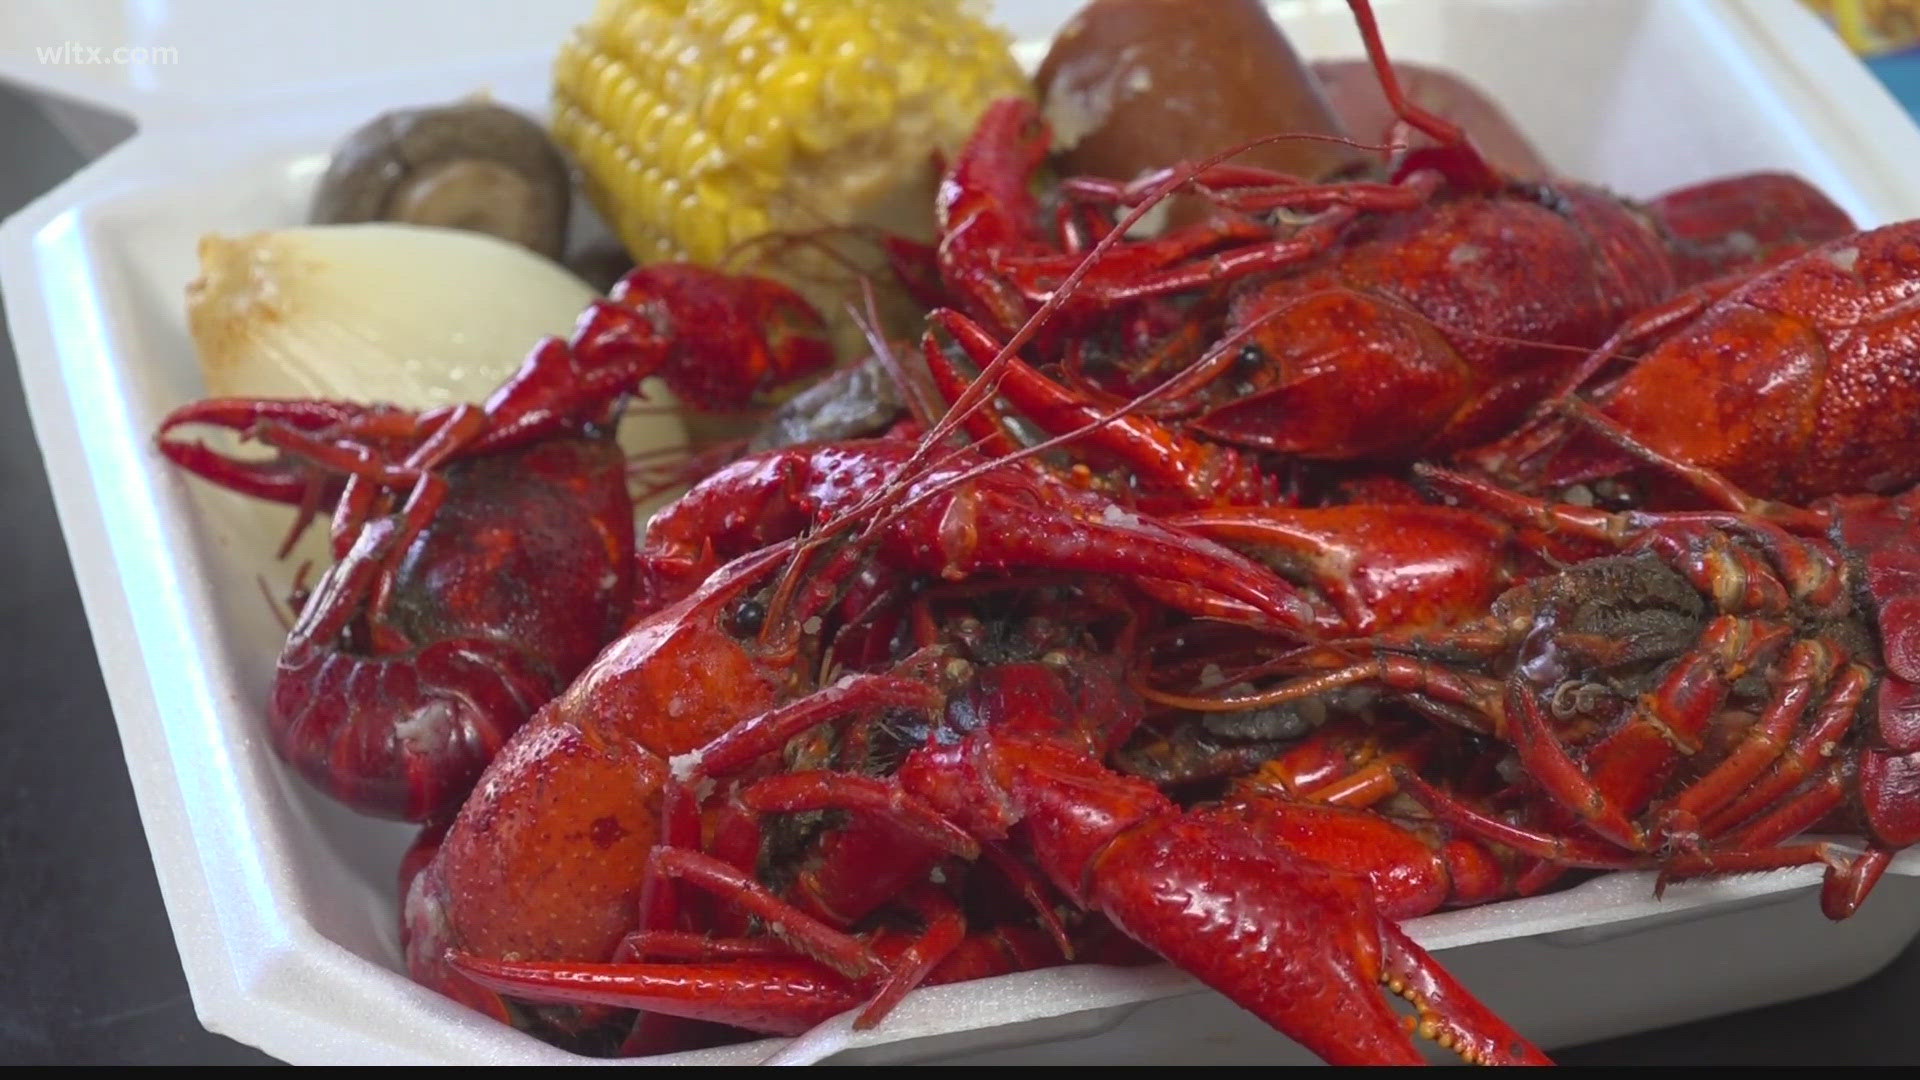 Elliott's Crawfish Farm has been family-owned since it began in the 50s. While the owners say the crawfish trend took time to catch on, now they're selling out.